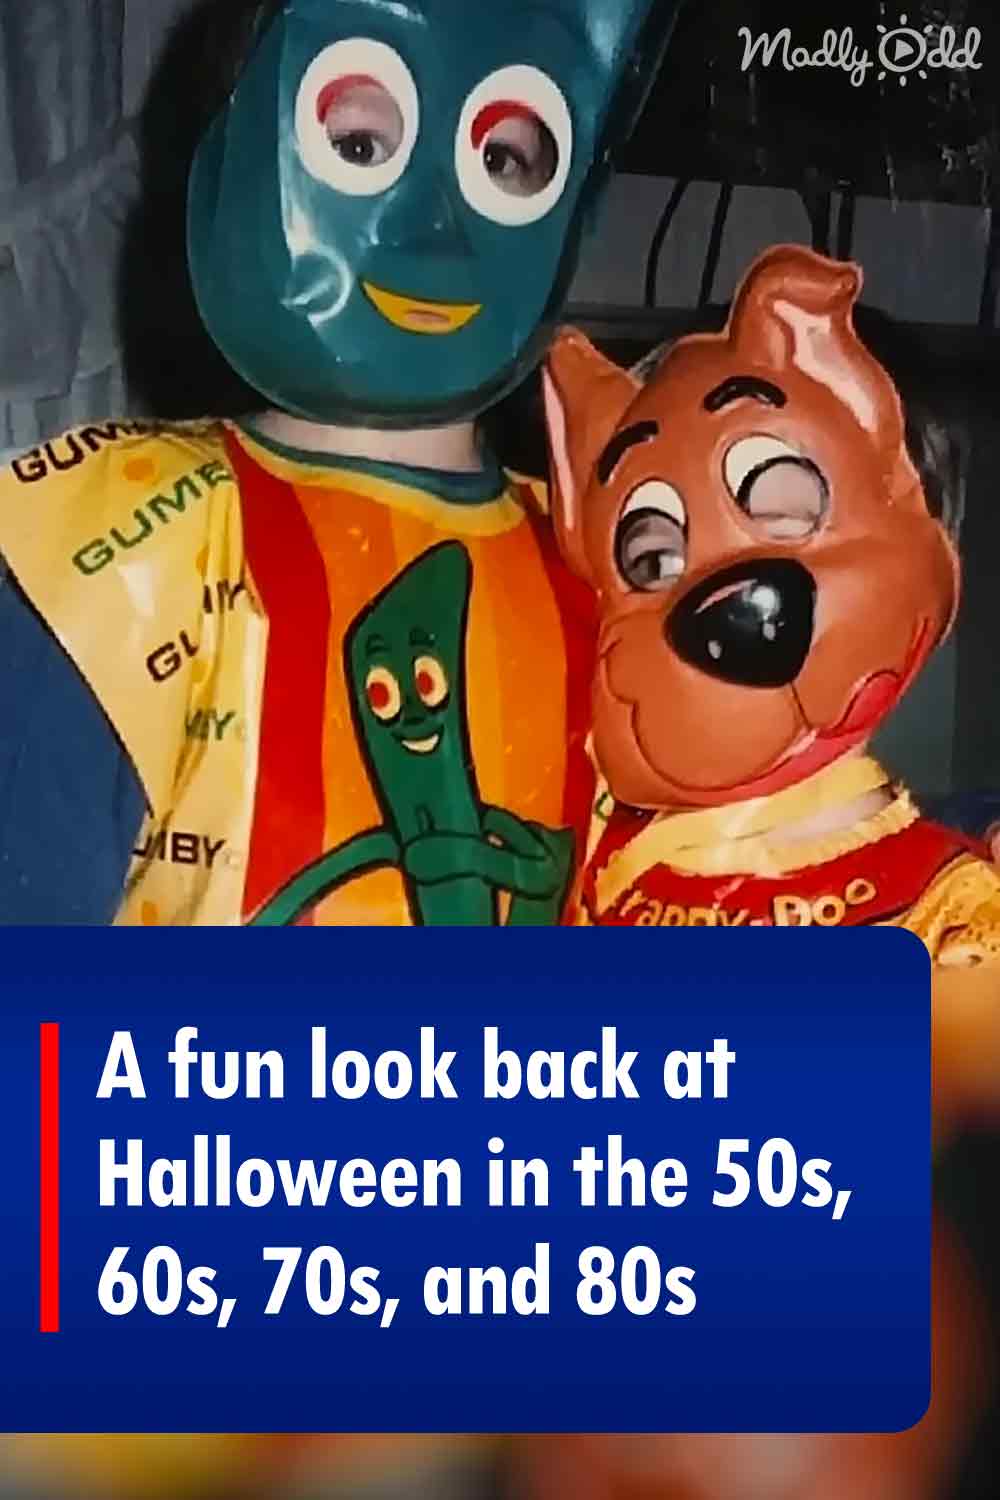 A fun look back at Halloween in the 50s, 60s, 70s, and 80s